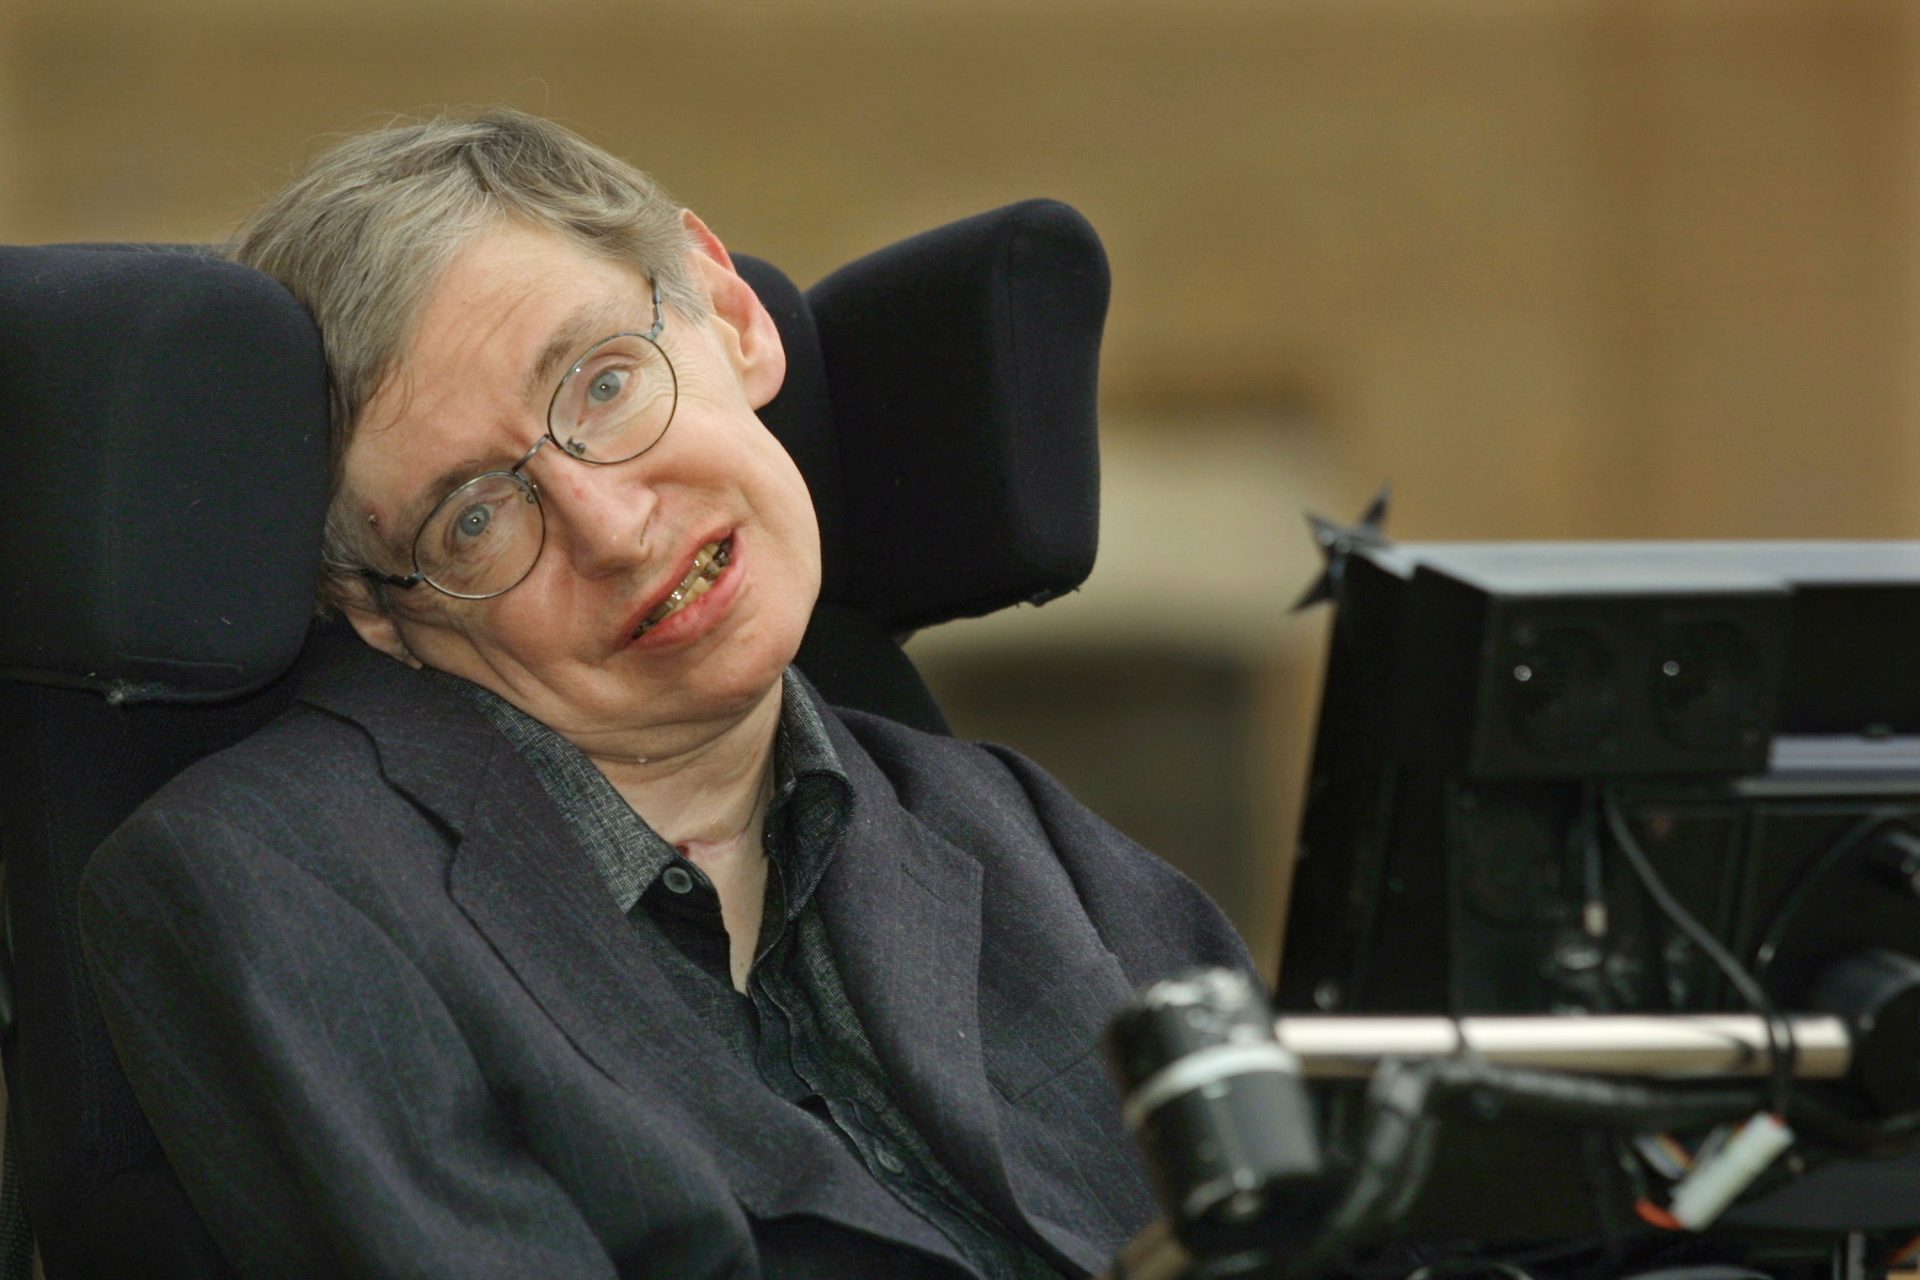 Stephen Hawking's theory on the universe's beginning and end